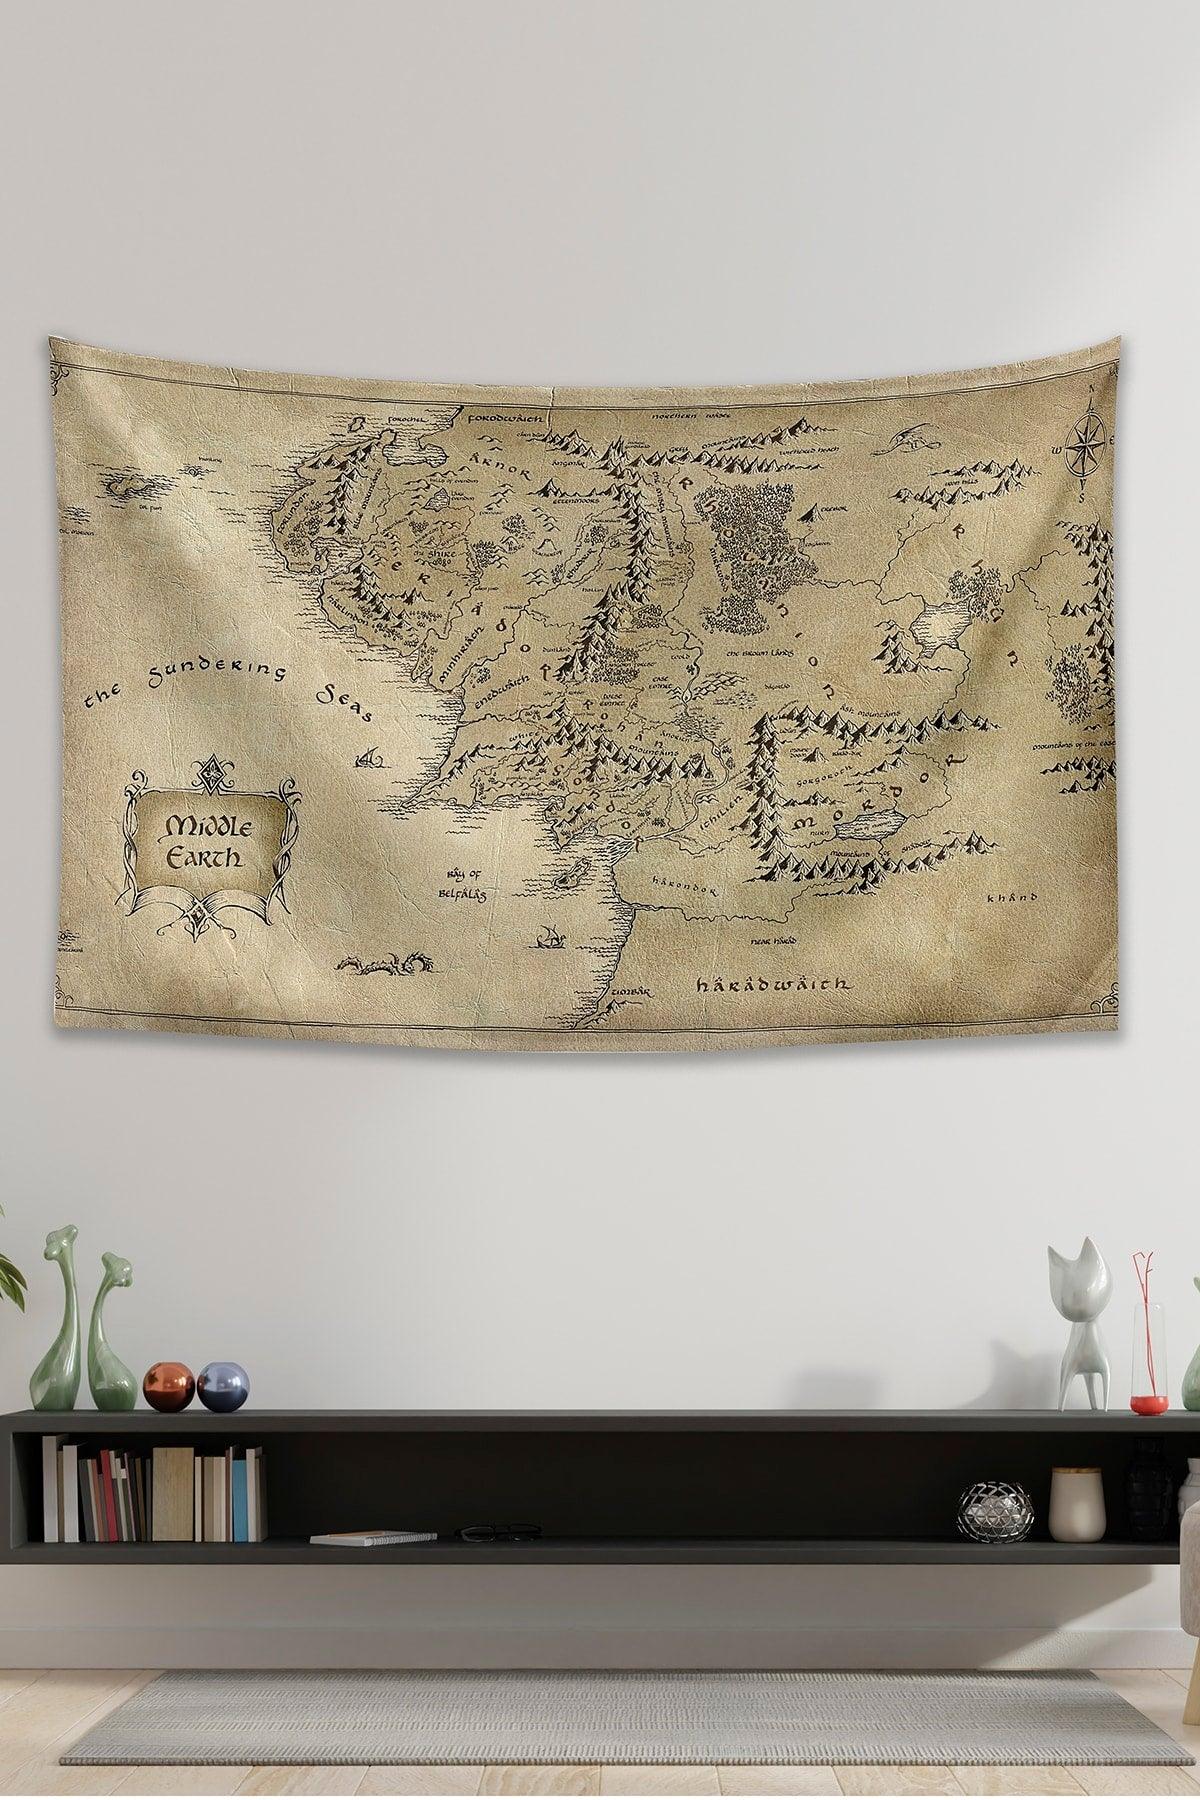 Lord of the Rings Middle Earth Map Wall Covering Carpet 140 X 100 Cm-70x100 Cm - Swordslife